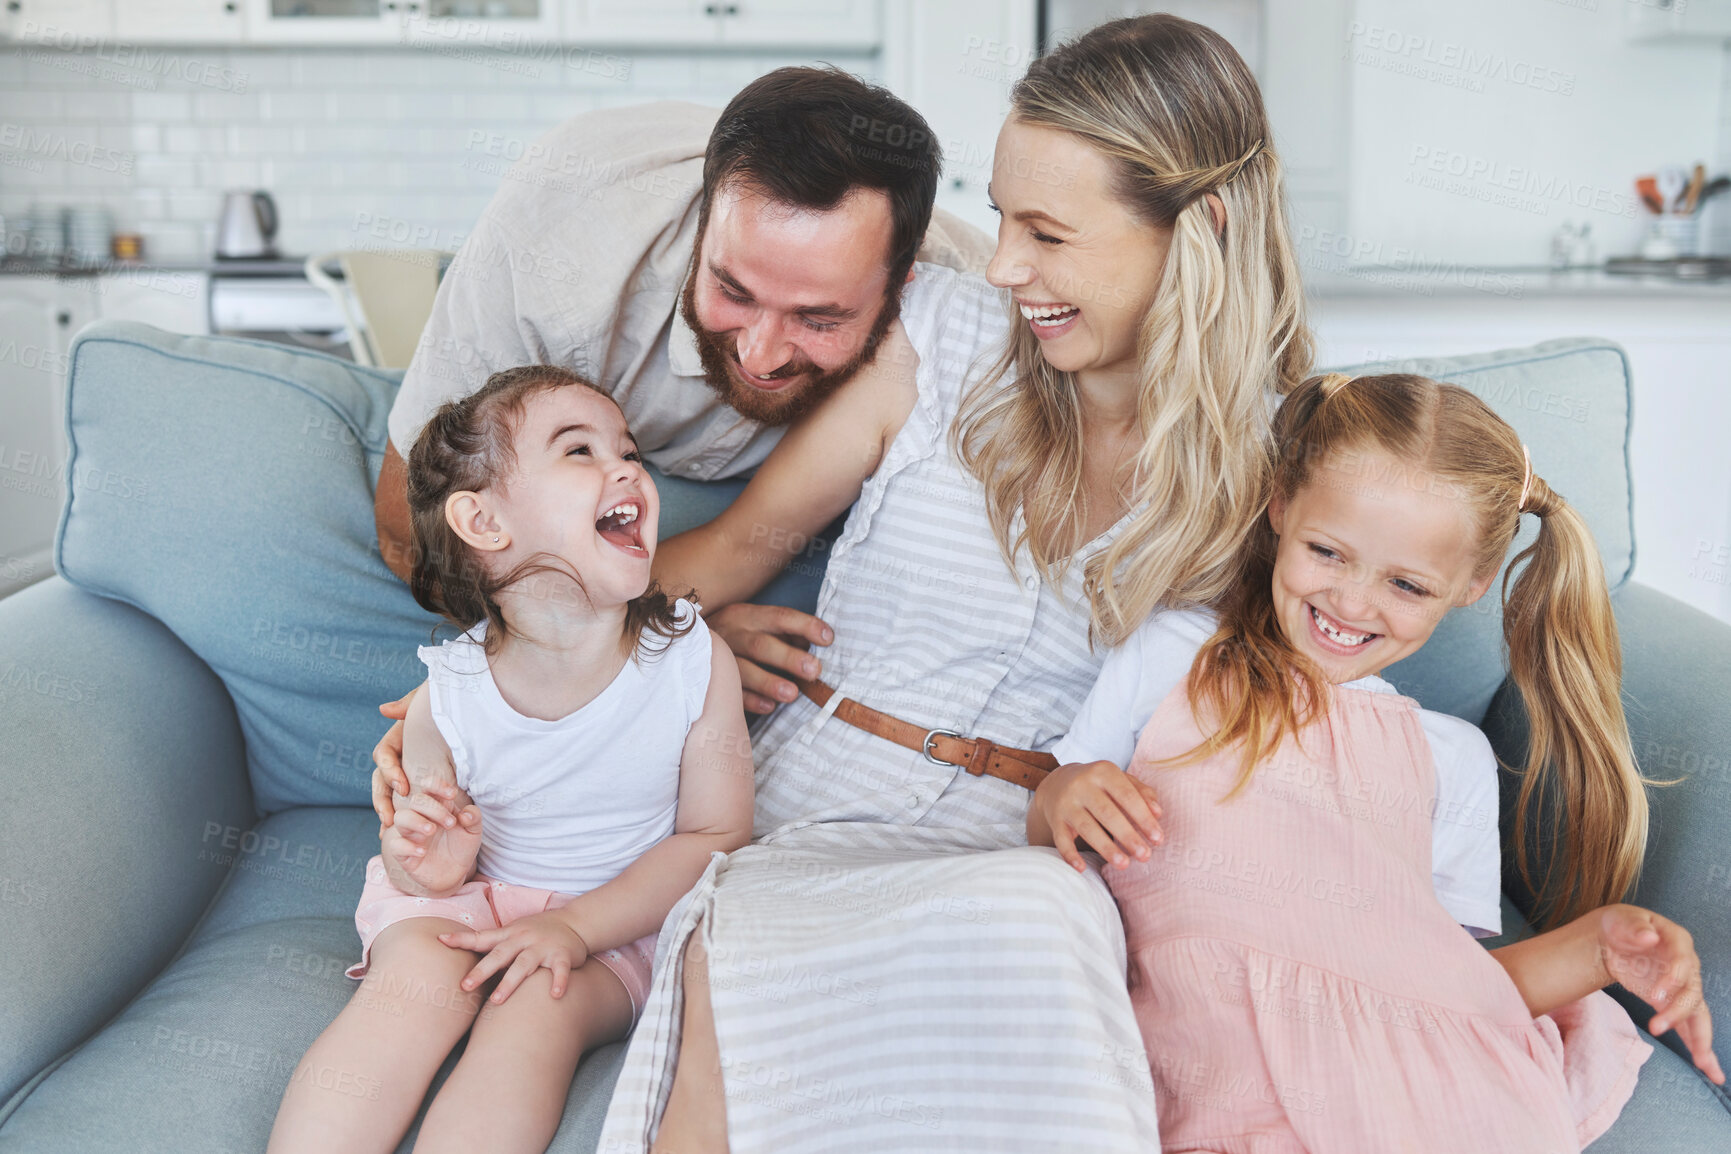 Buy stock photo Love, parents and happy family with children on sofa laughing for fun, bonding and leisure. Daughter, mom and dad with kids in Canada enjoy playful and excited smile together in living room.

